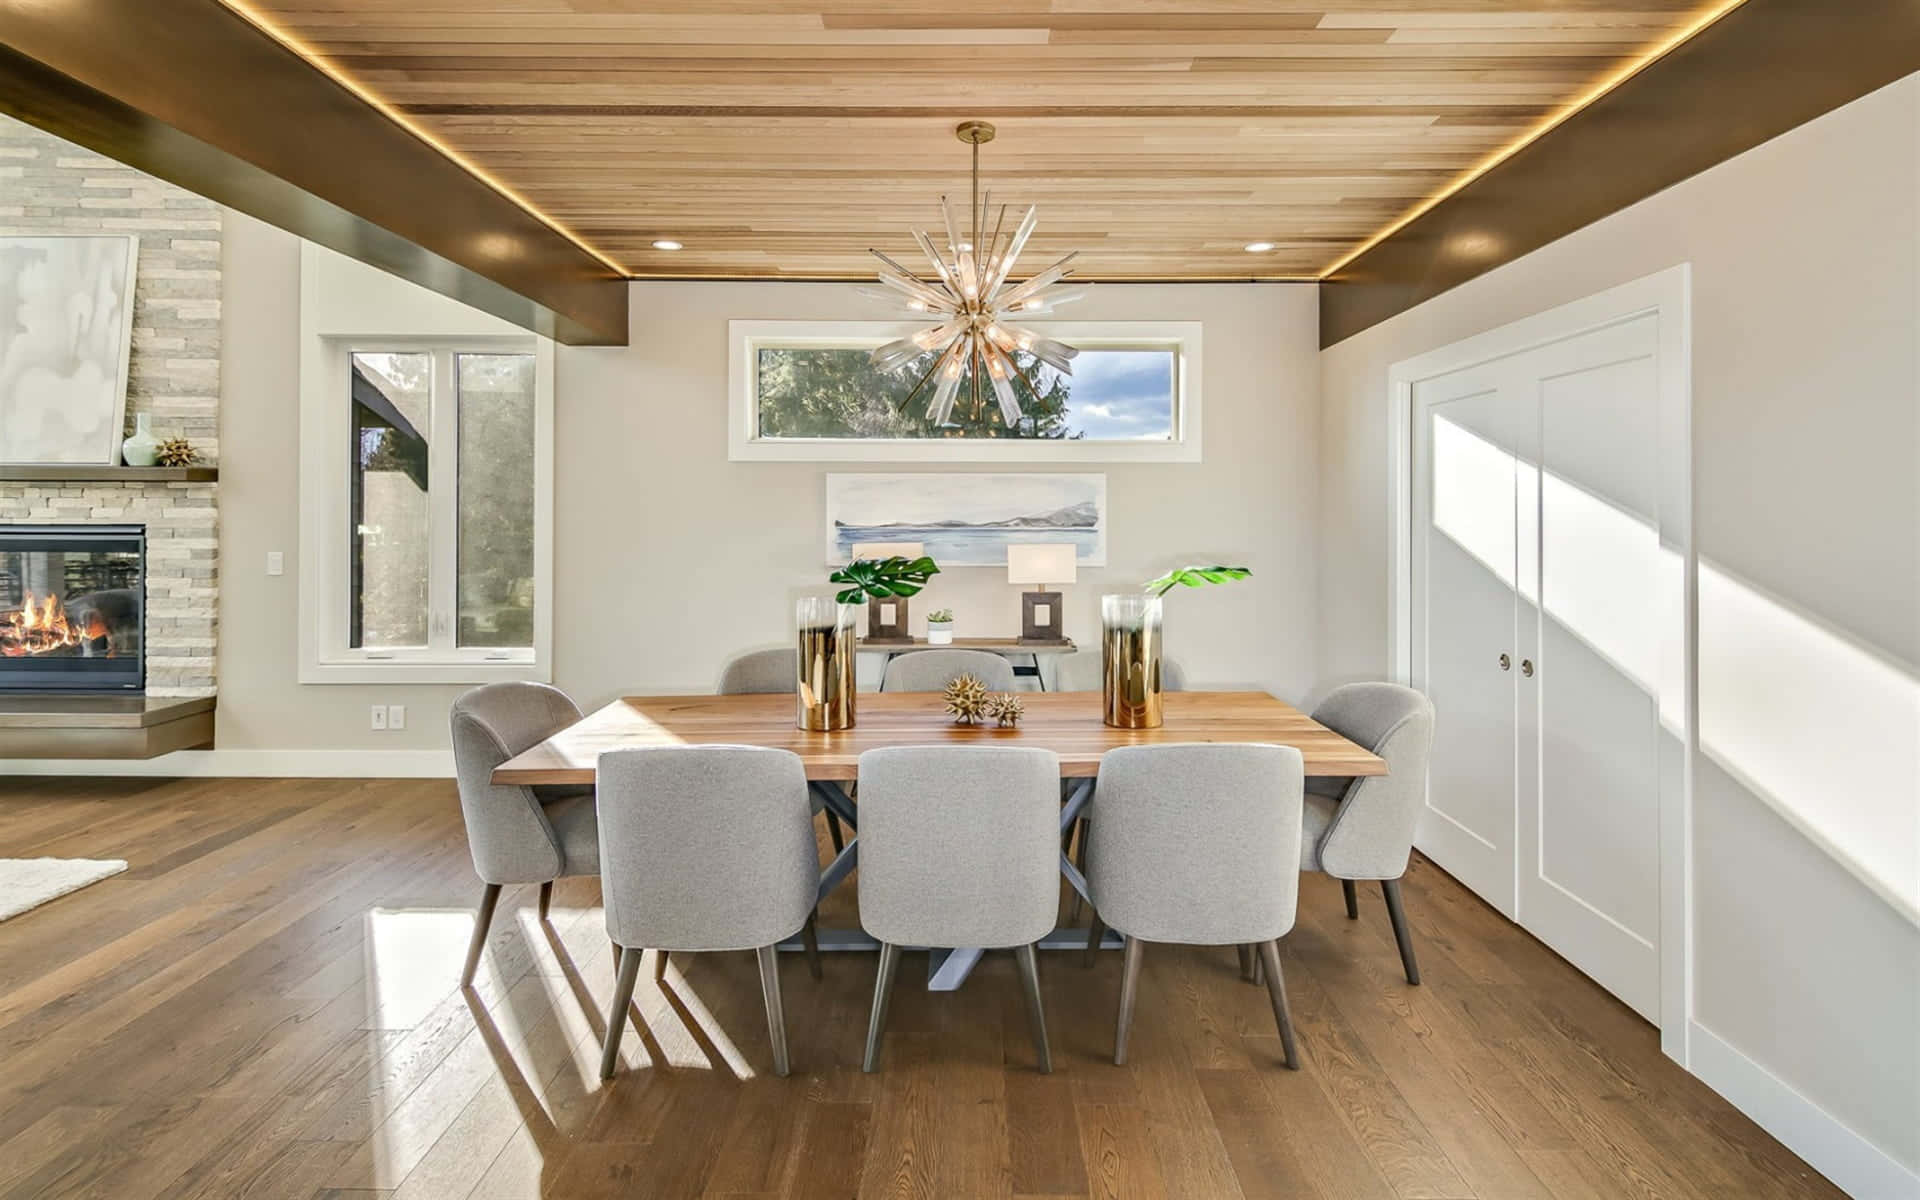 Relax and entertain in this warm and inviting dining room